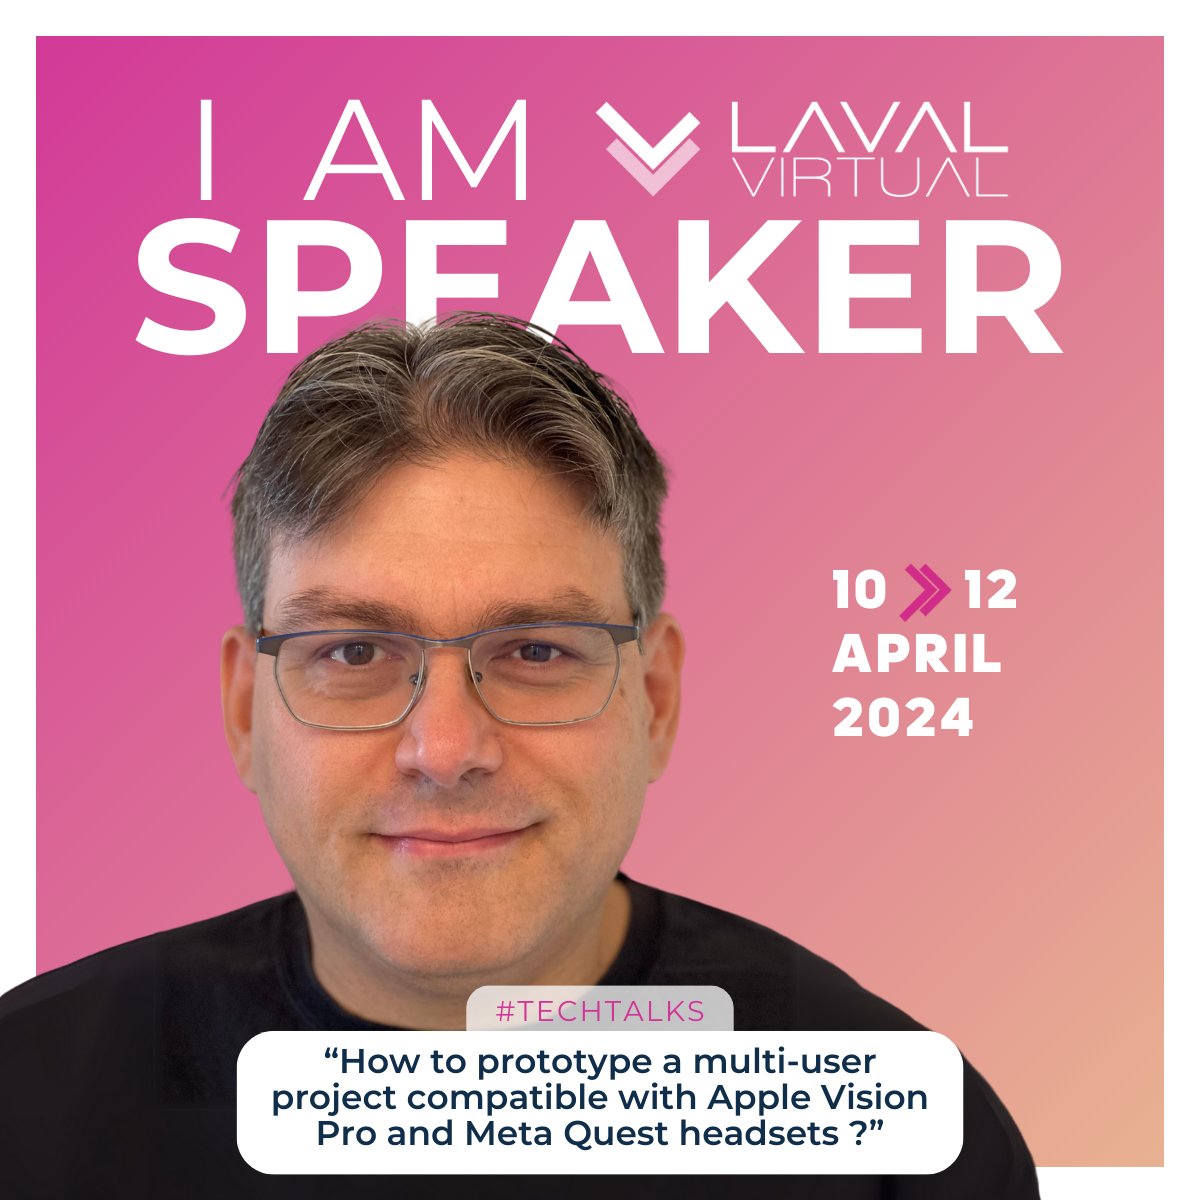 I am pleased to announce that I will be a speaker at @LavalVirtual (April 10-12)! 

With @r_guignon, we will discuss 'How to prototype a multi-user project compatible with Apple Vision Pro and Meta Quest headsets ?', with the help of Fusion, by Photon Engine (@ExitGames )